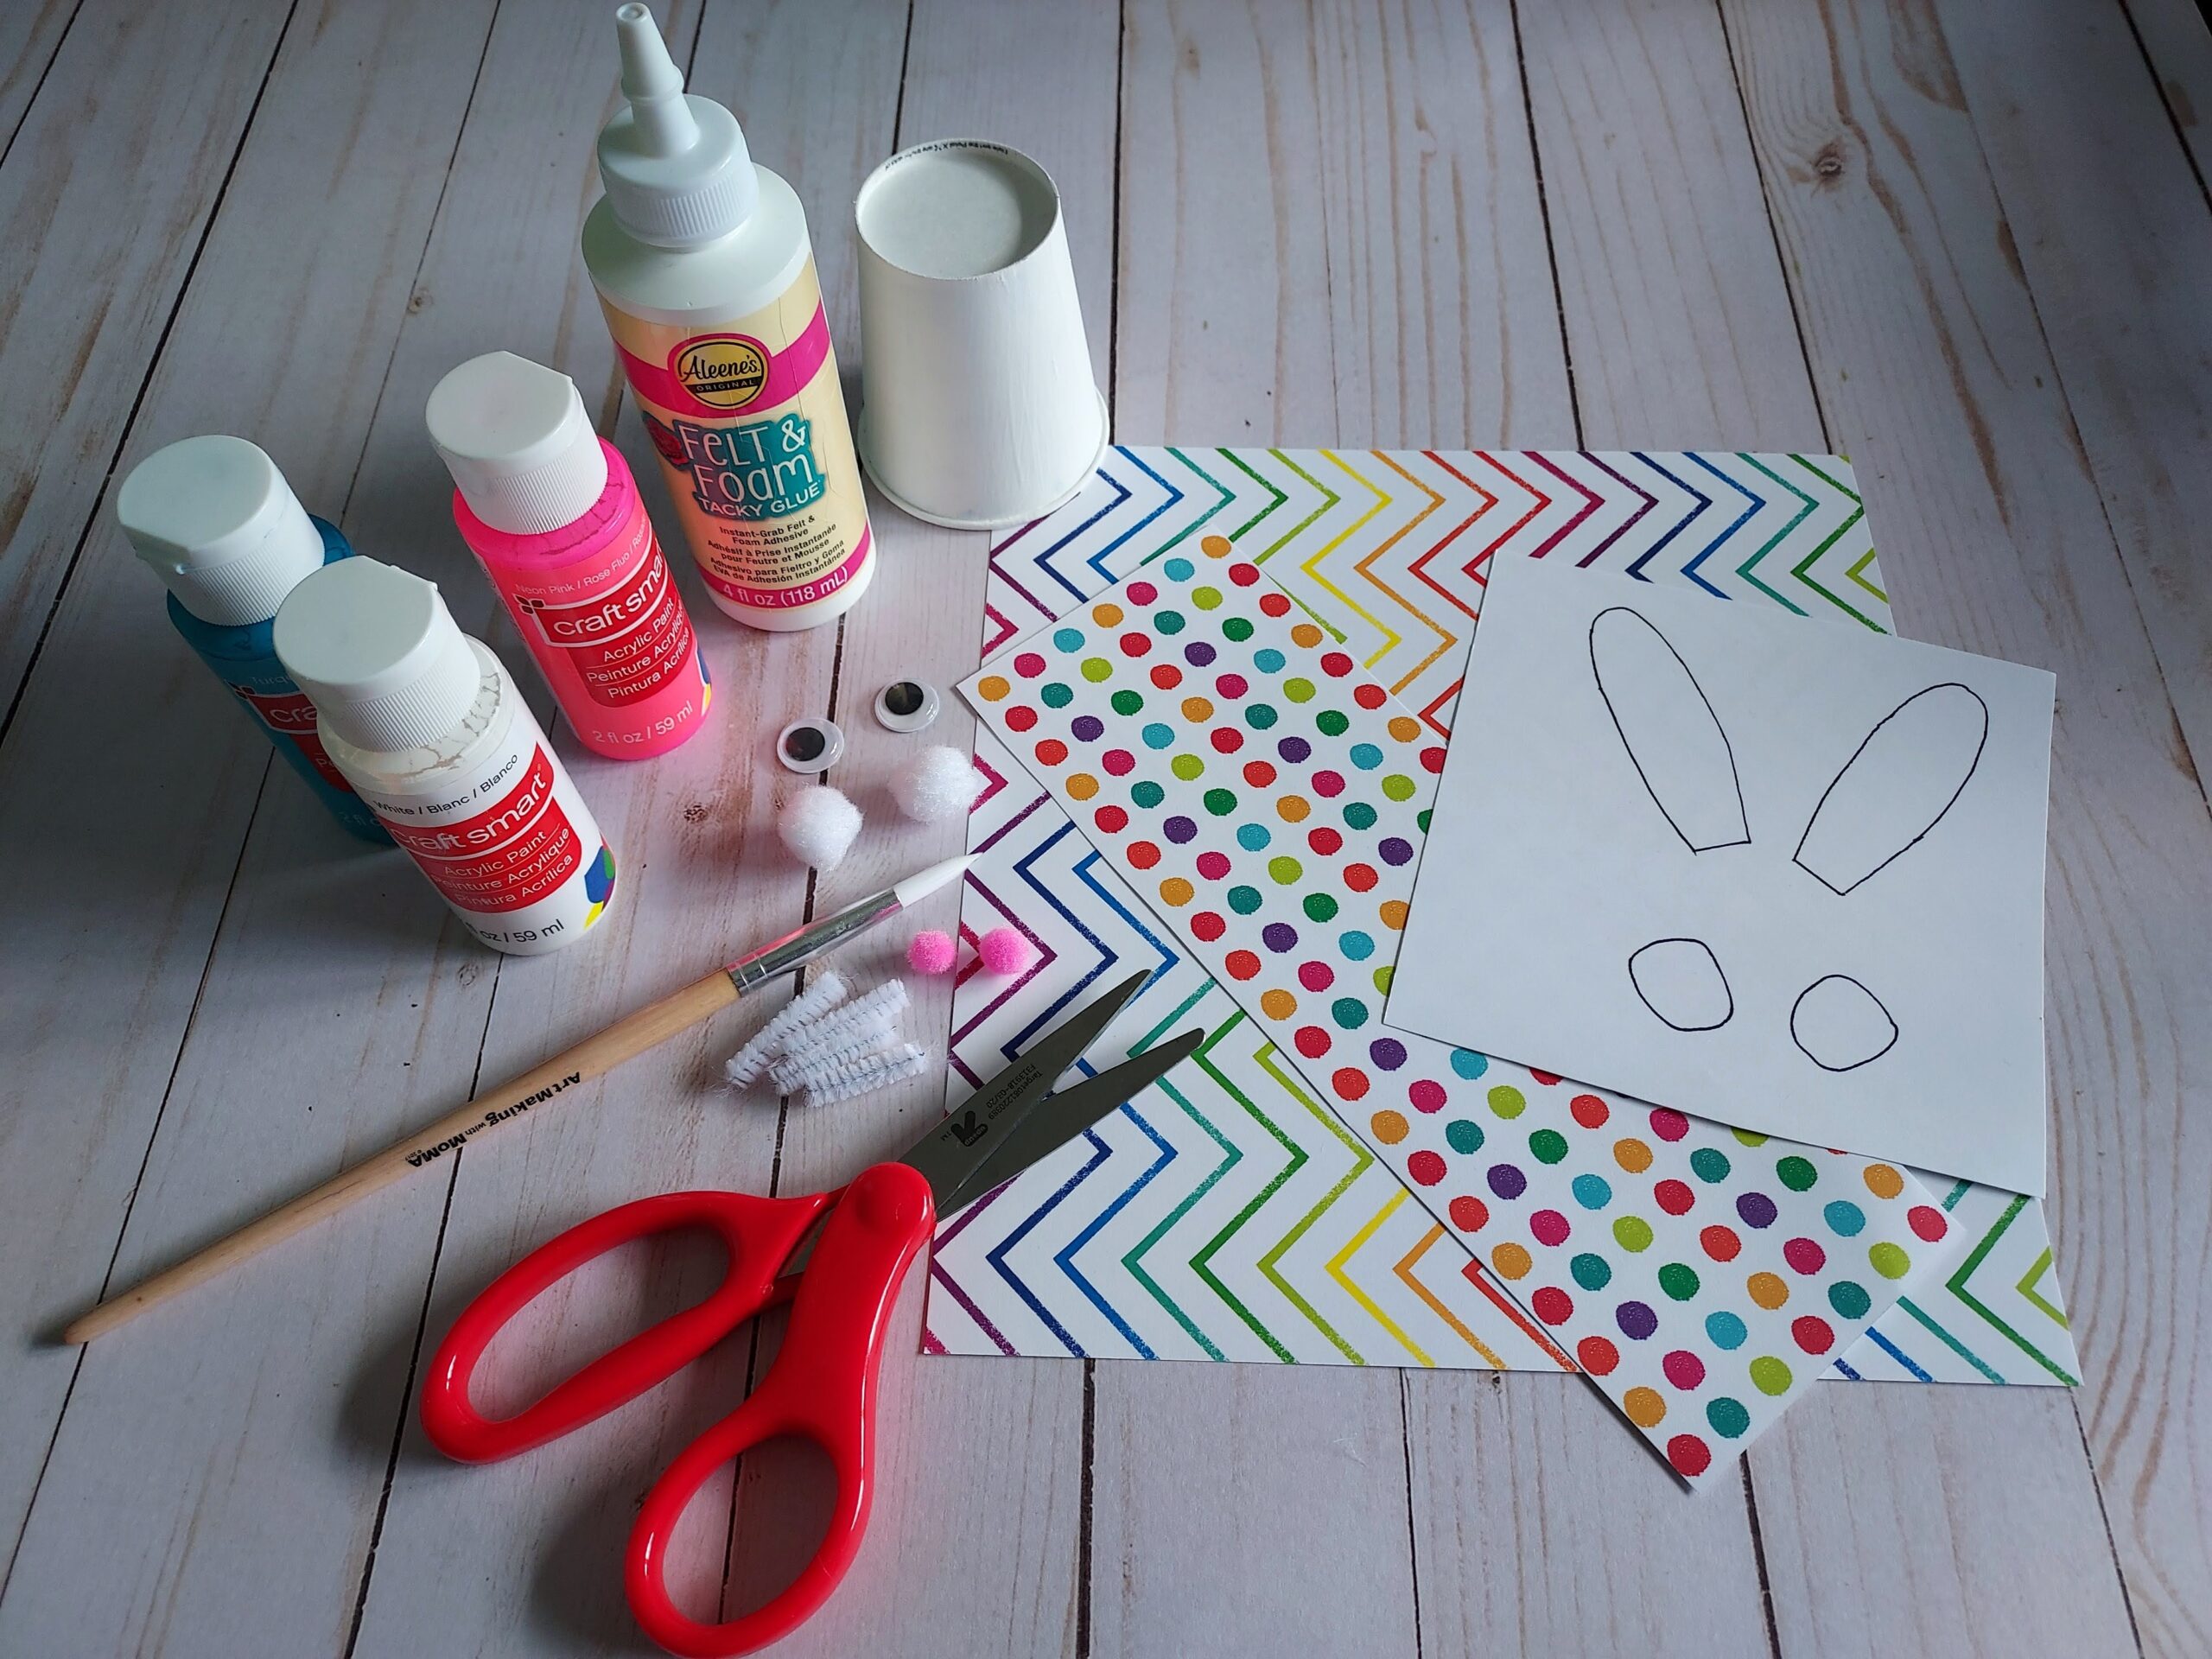 Craft supplies for making paper cup bunnies gathered on table: paint, cup, tacky glue, scissors, patterned cardstock paper, googly eyes, pom poms, chenille stem, and printable template for ears and feet.